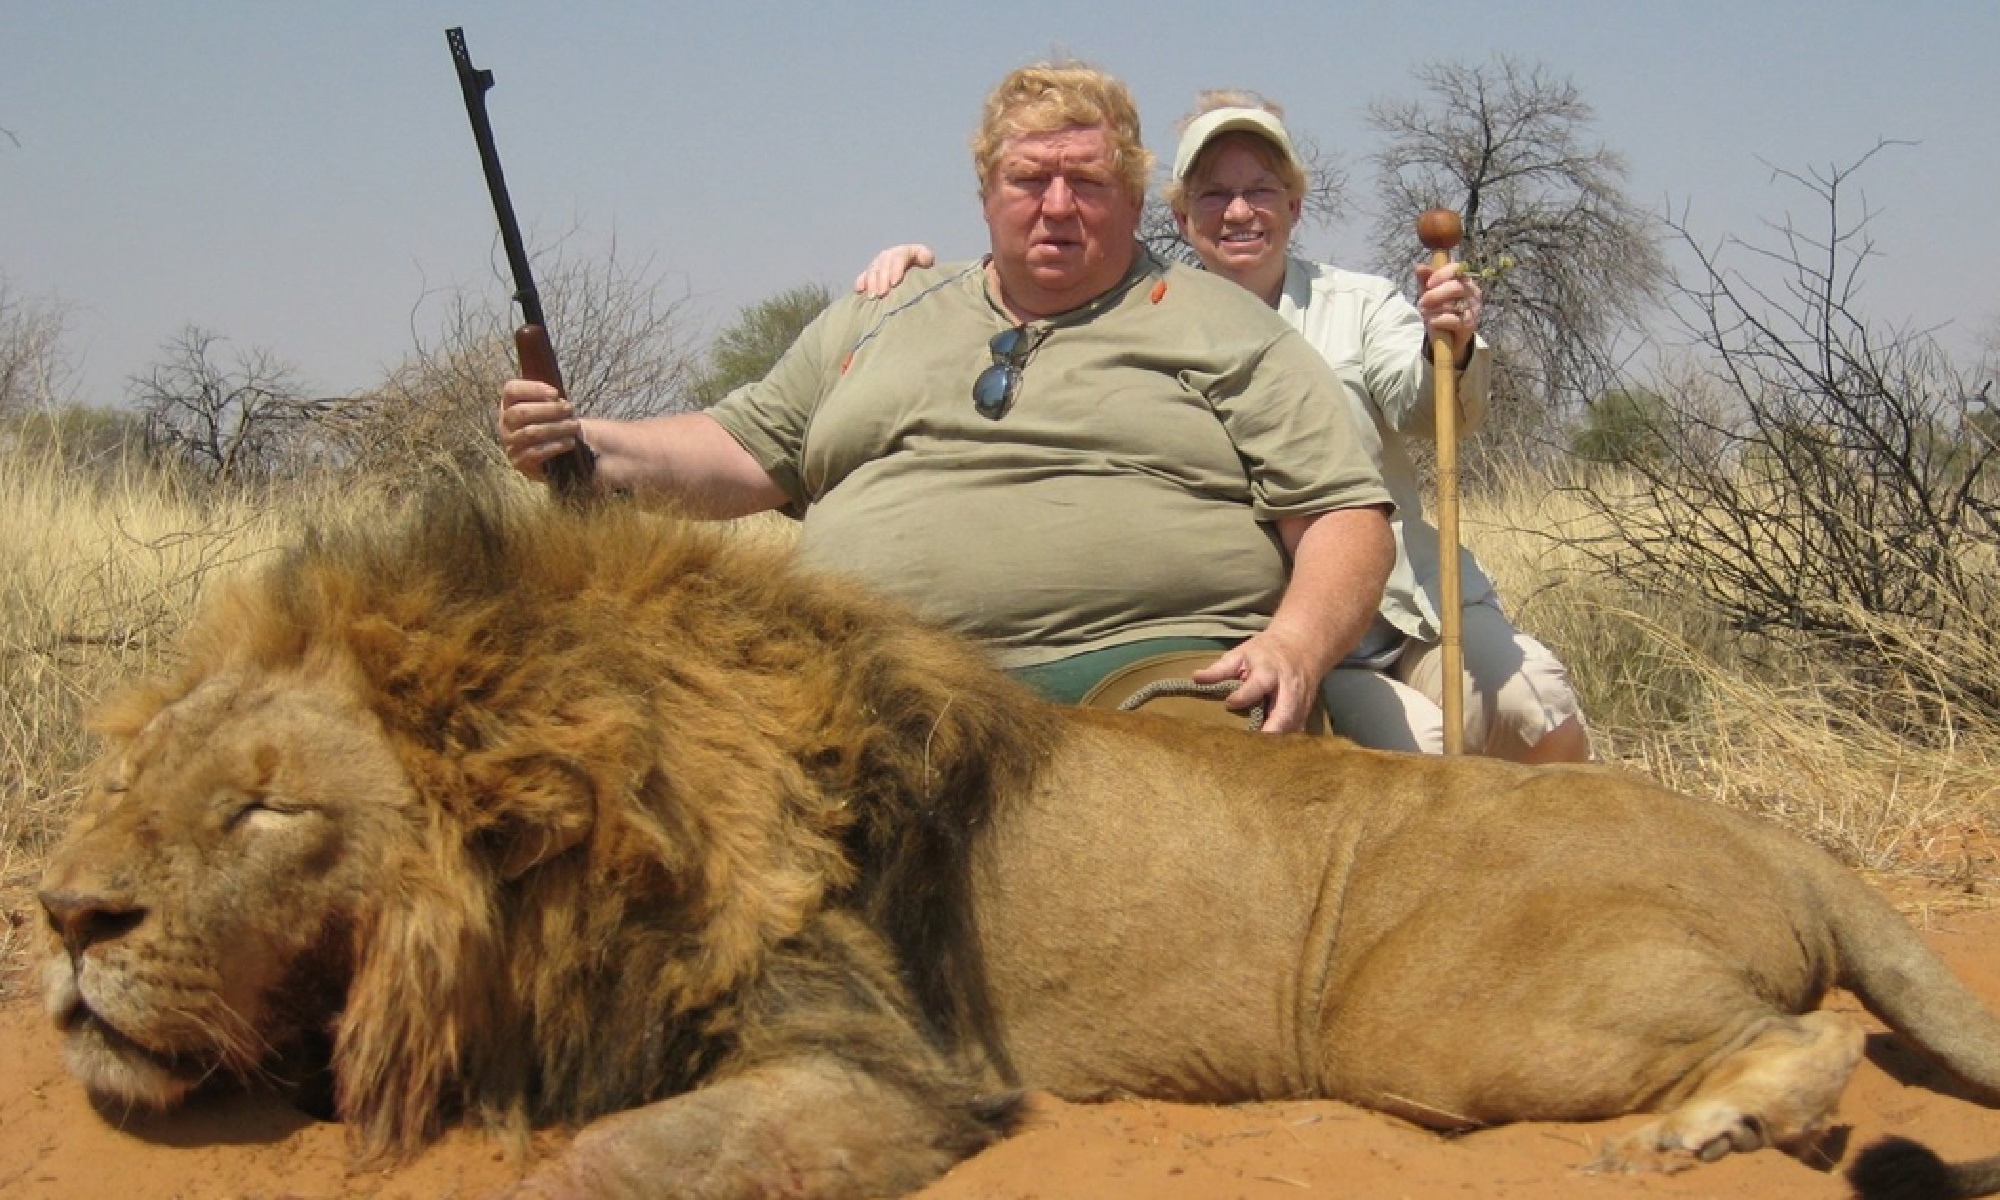 Viral Story on Hunter Eaten by Lions Is Fake